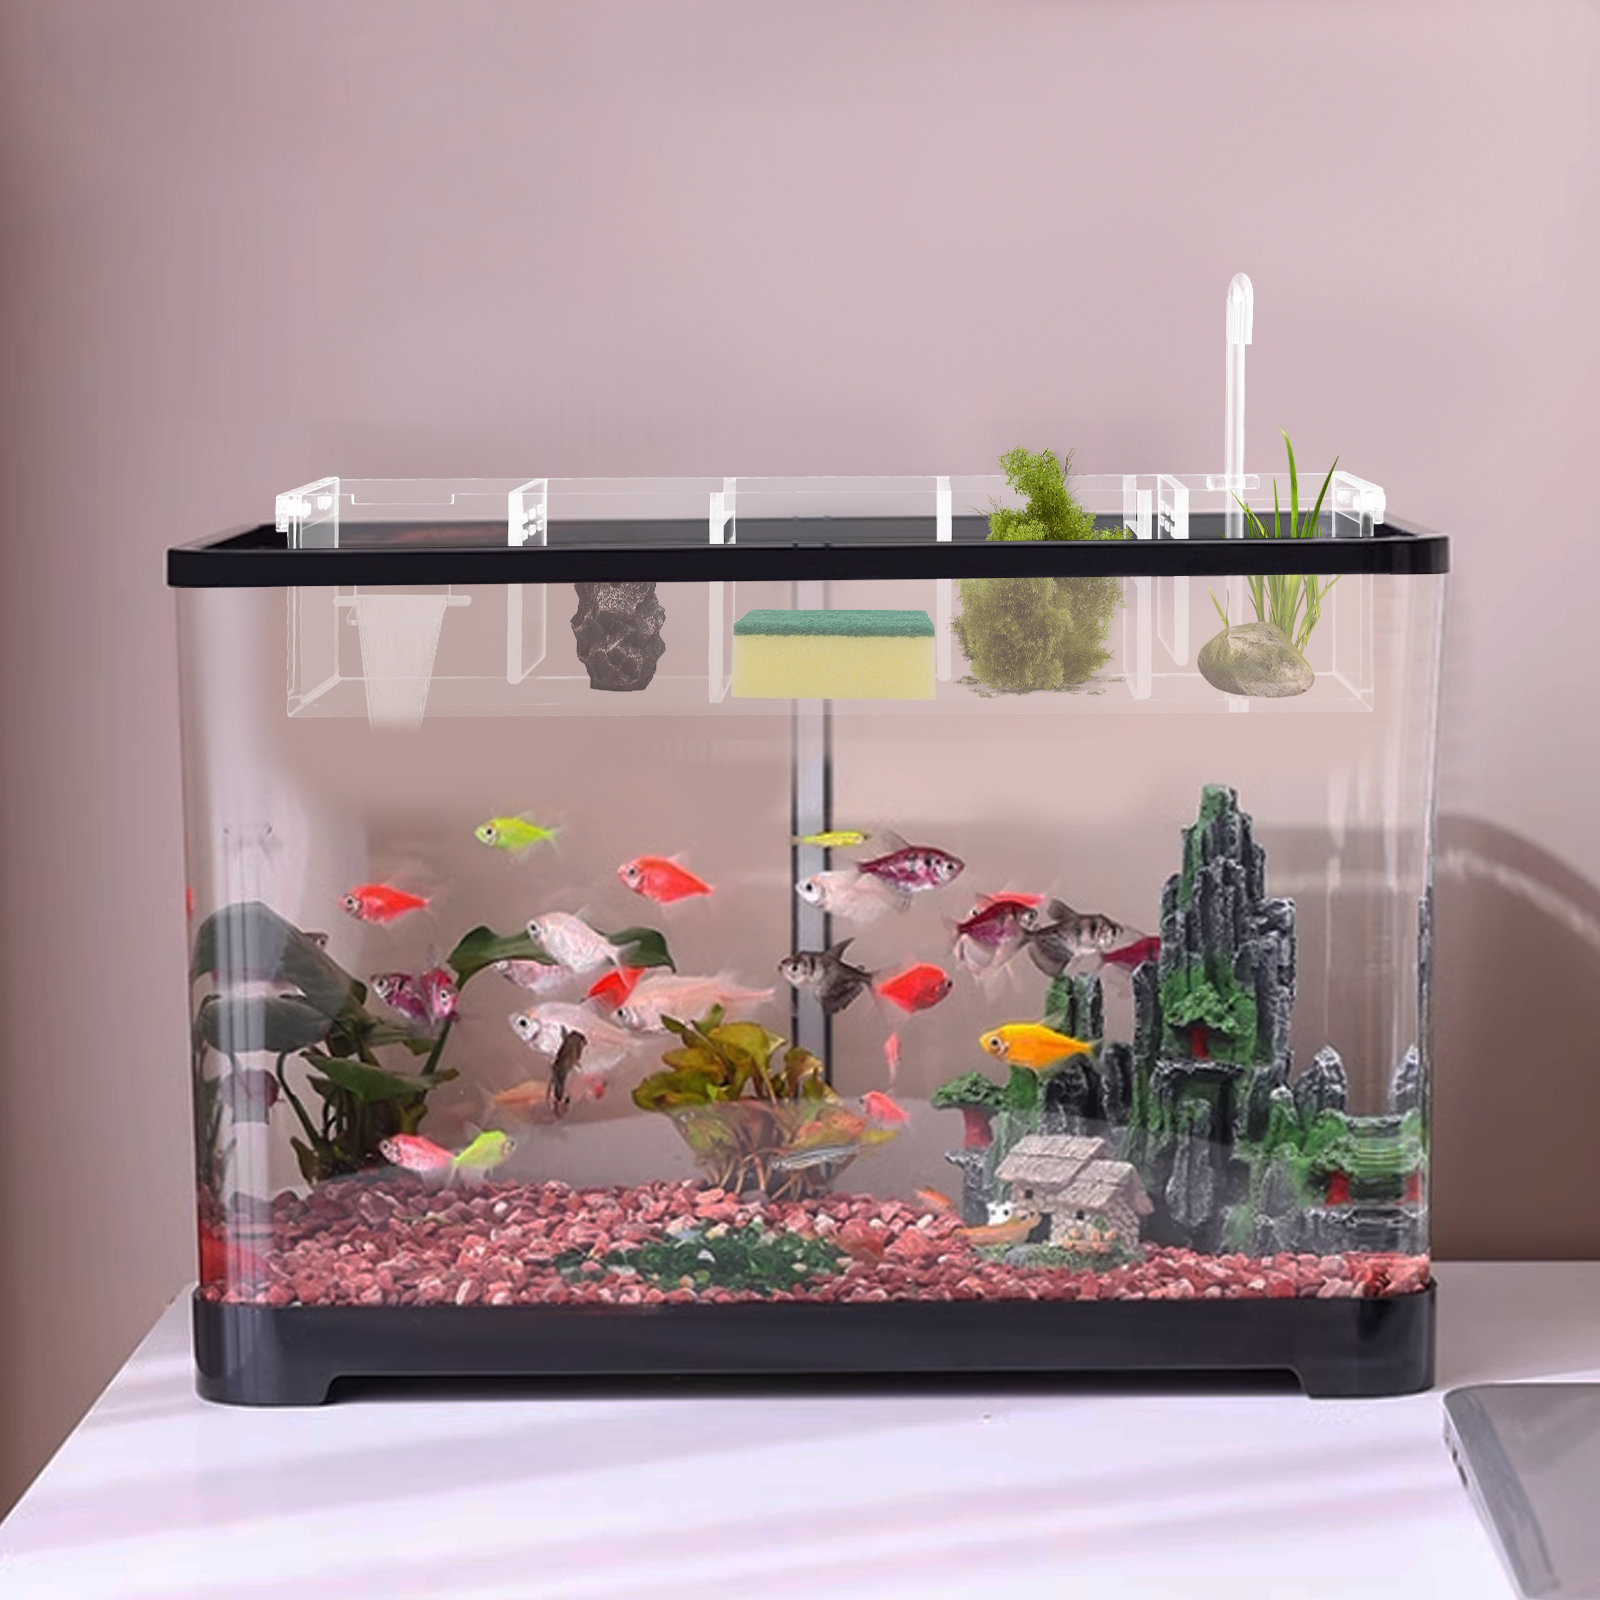 Shop Betta Fiah Tank Cleaner with great discounts and prices